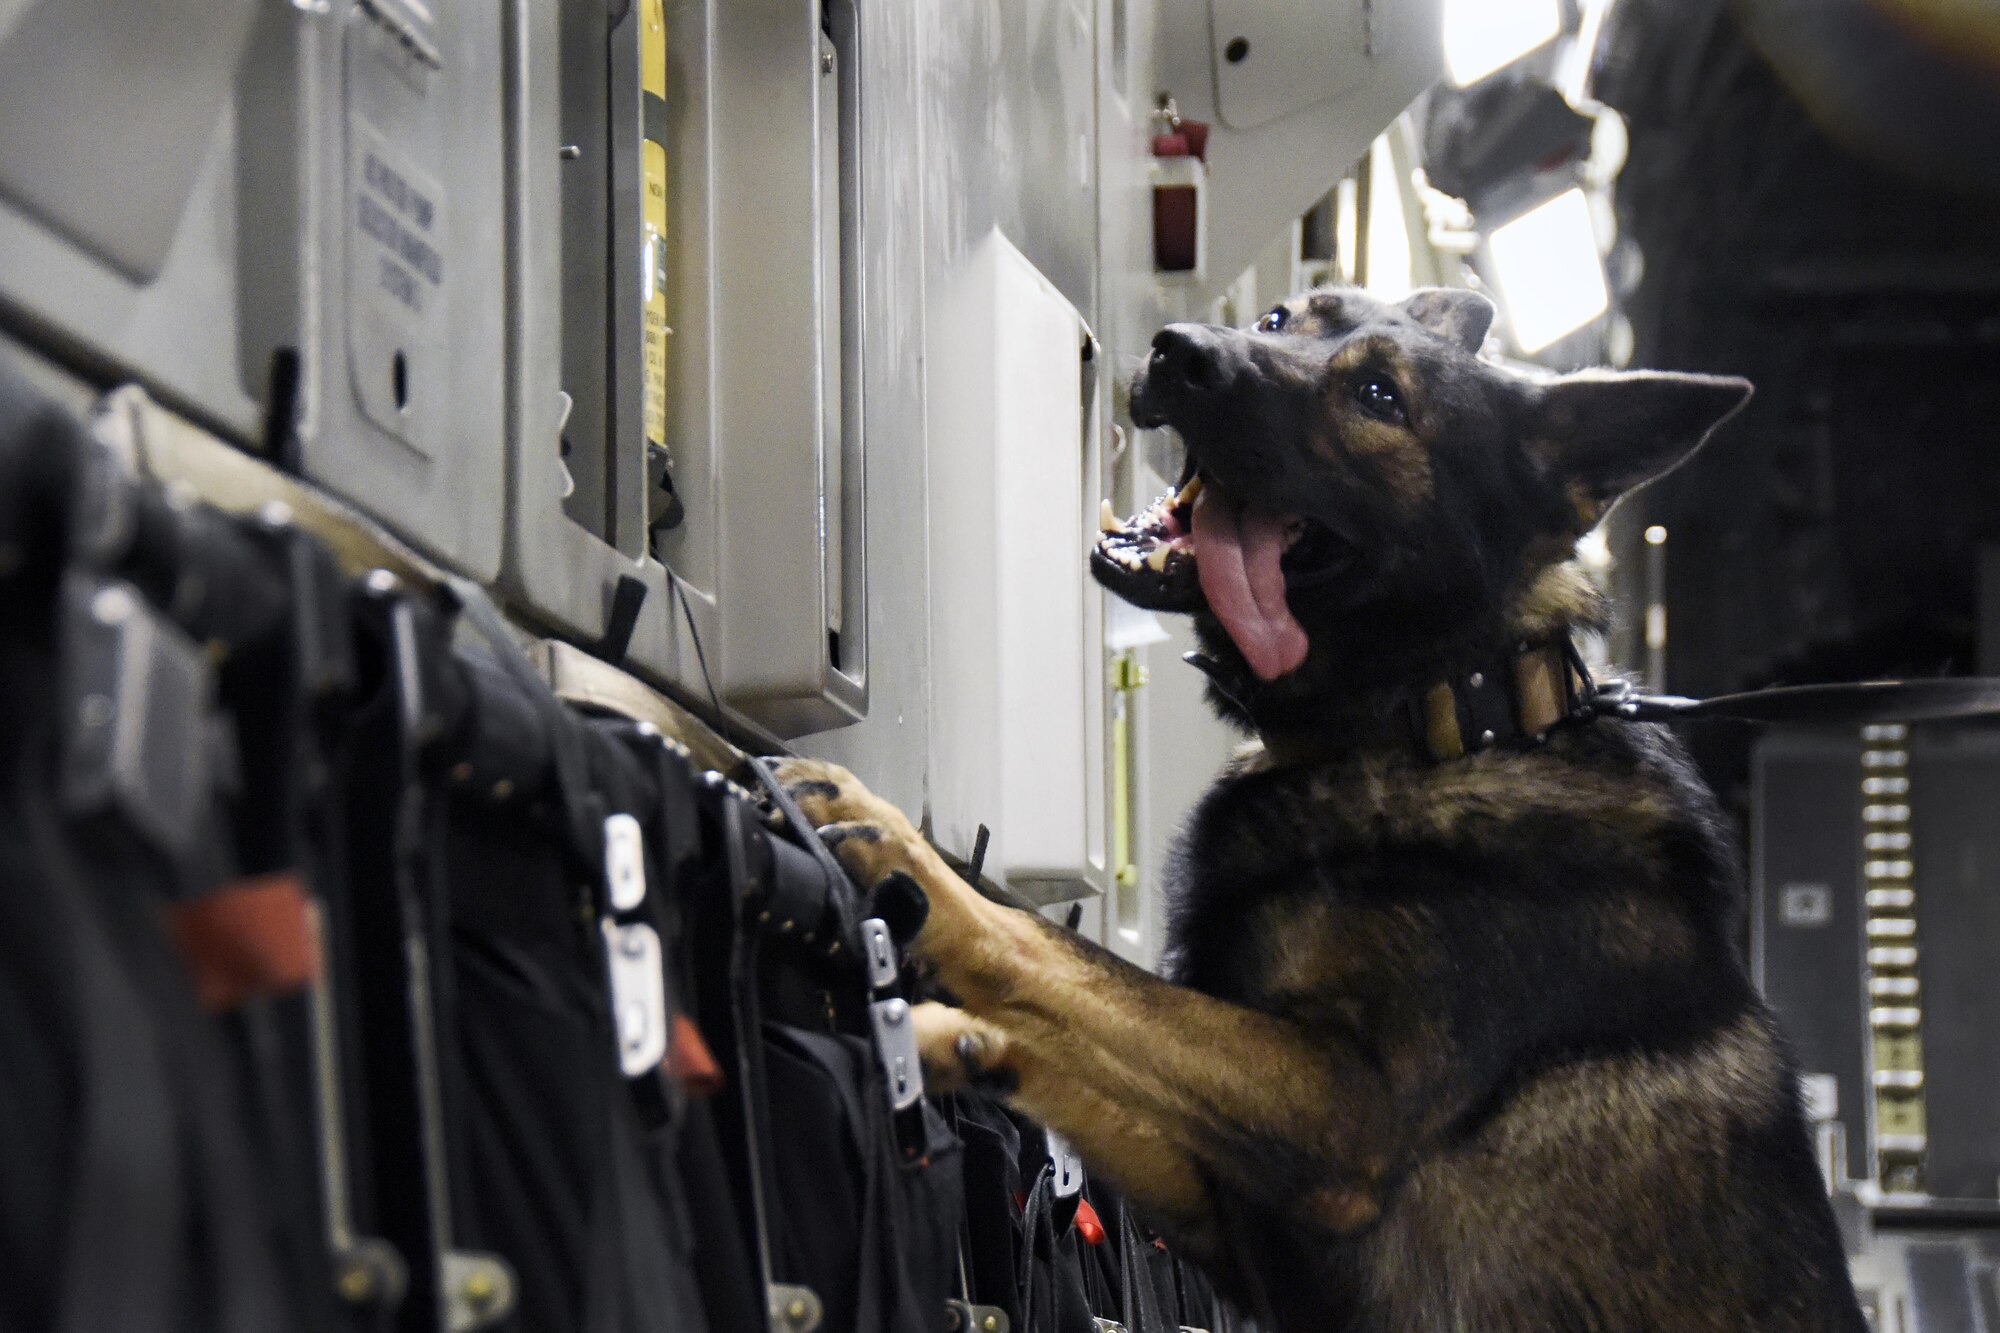 U.S. Air Force military working dog Jimo, with the 379th Expeditionary Security Forces Squadron, climbs onto a seat in a C-17 Globemaster III during detection training at Al Udeid Air Base, Qatar, April 15, 2017. Training in this type of environment is beneficial to improving the working dogs performance in detection missions.  (U.S. Air Force photo by Senior Airman Cynthia A. Innocenti)